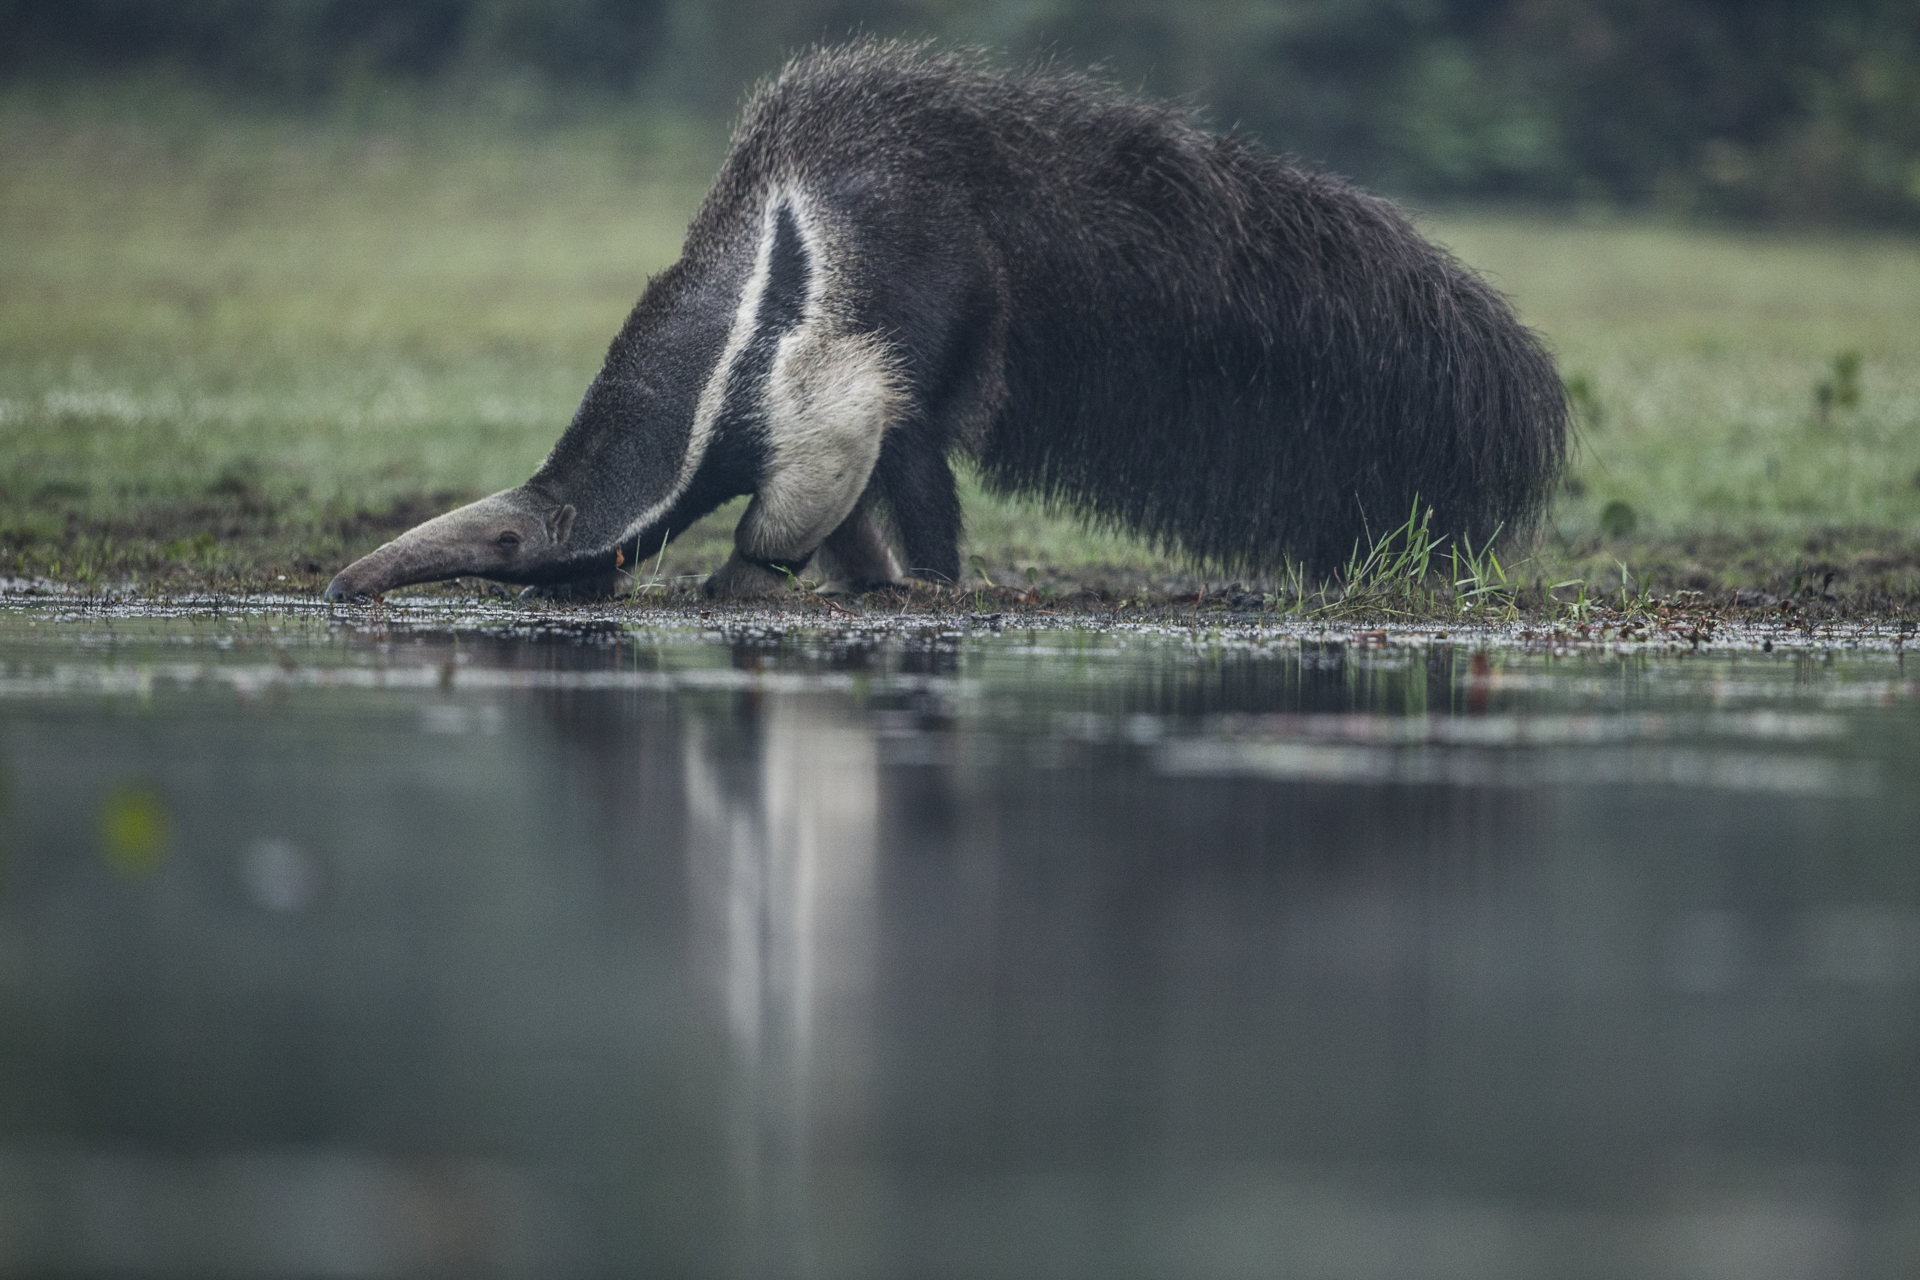  A giant anteater takes a drink.&nbsp; 